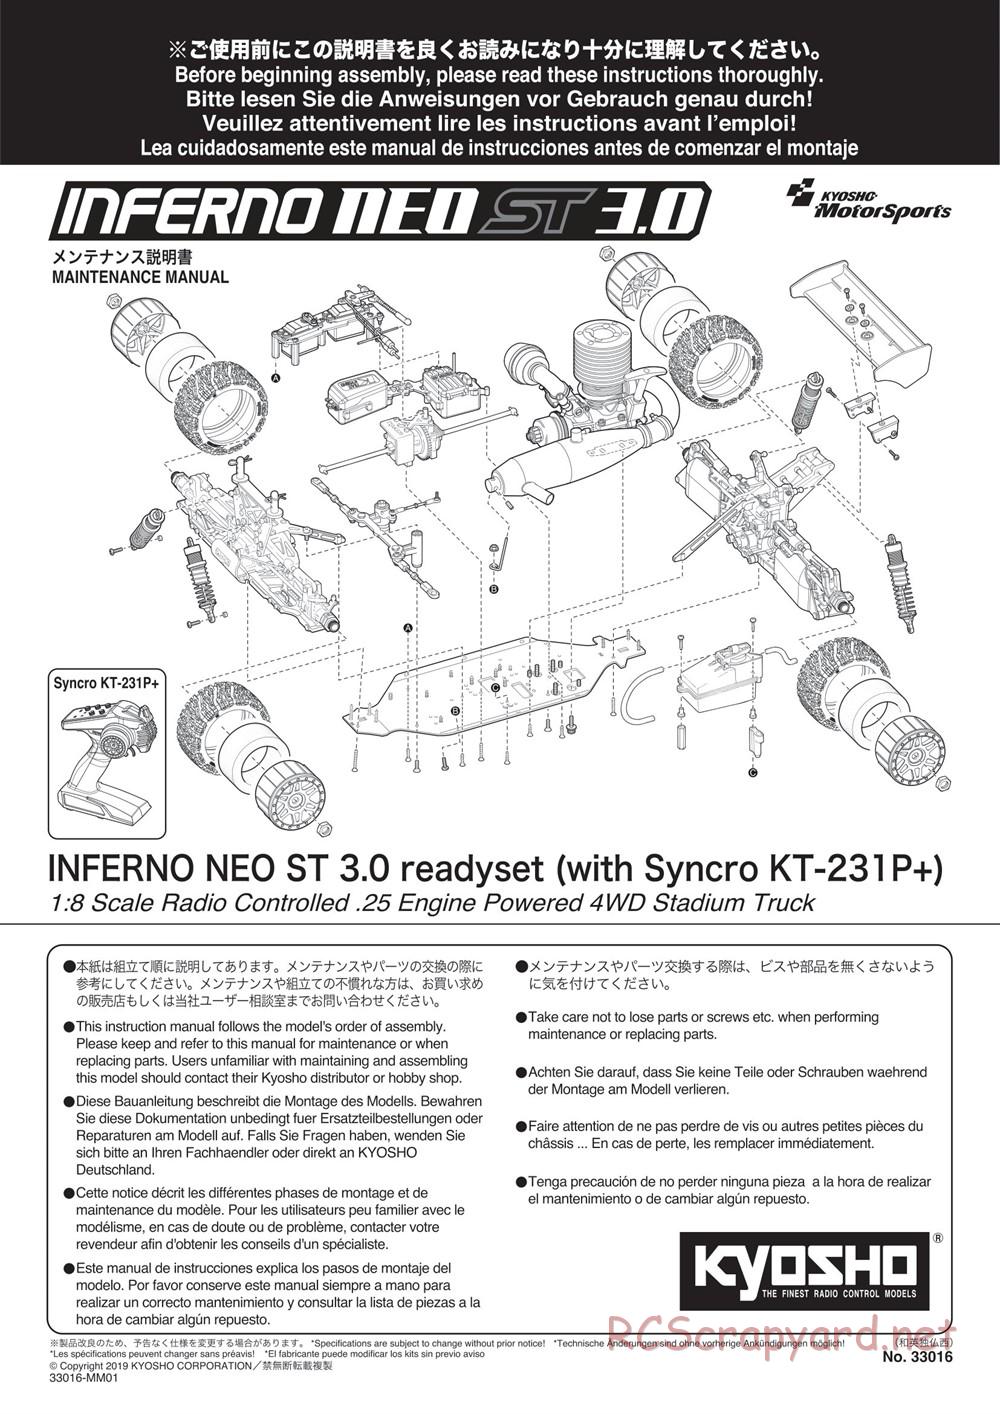 Kyosho - Inferno Neo ST 3.0 - Manual - Page 1